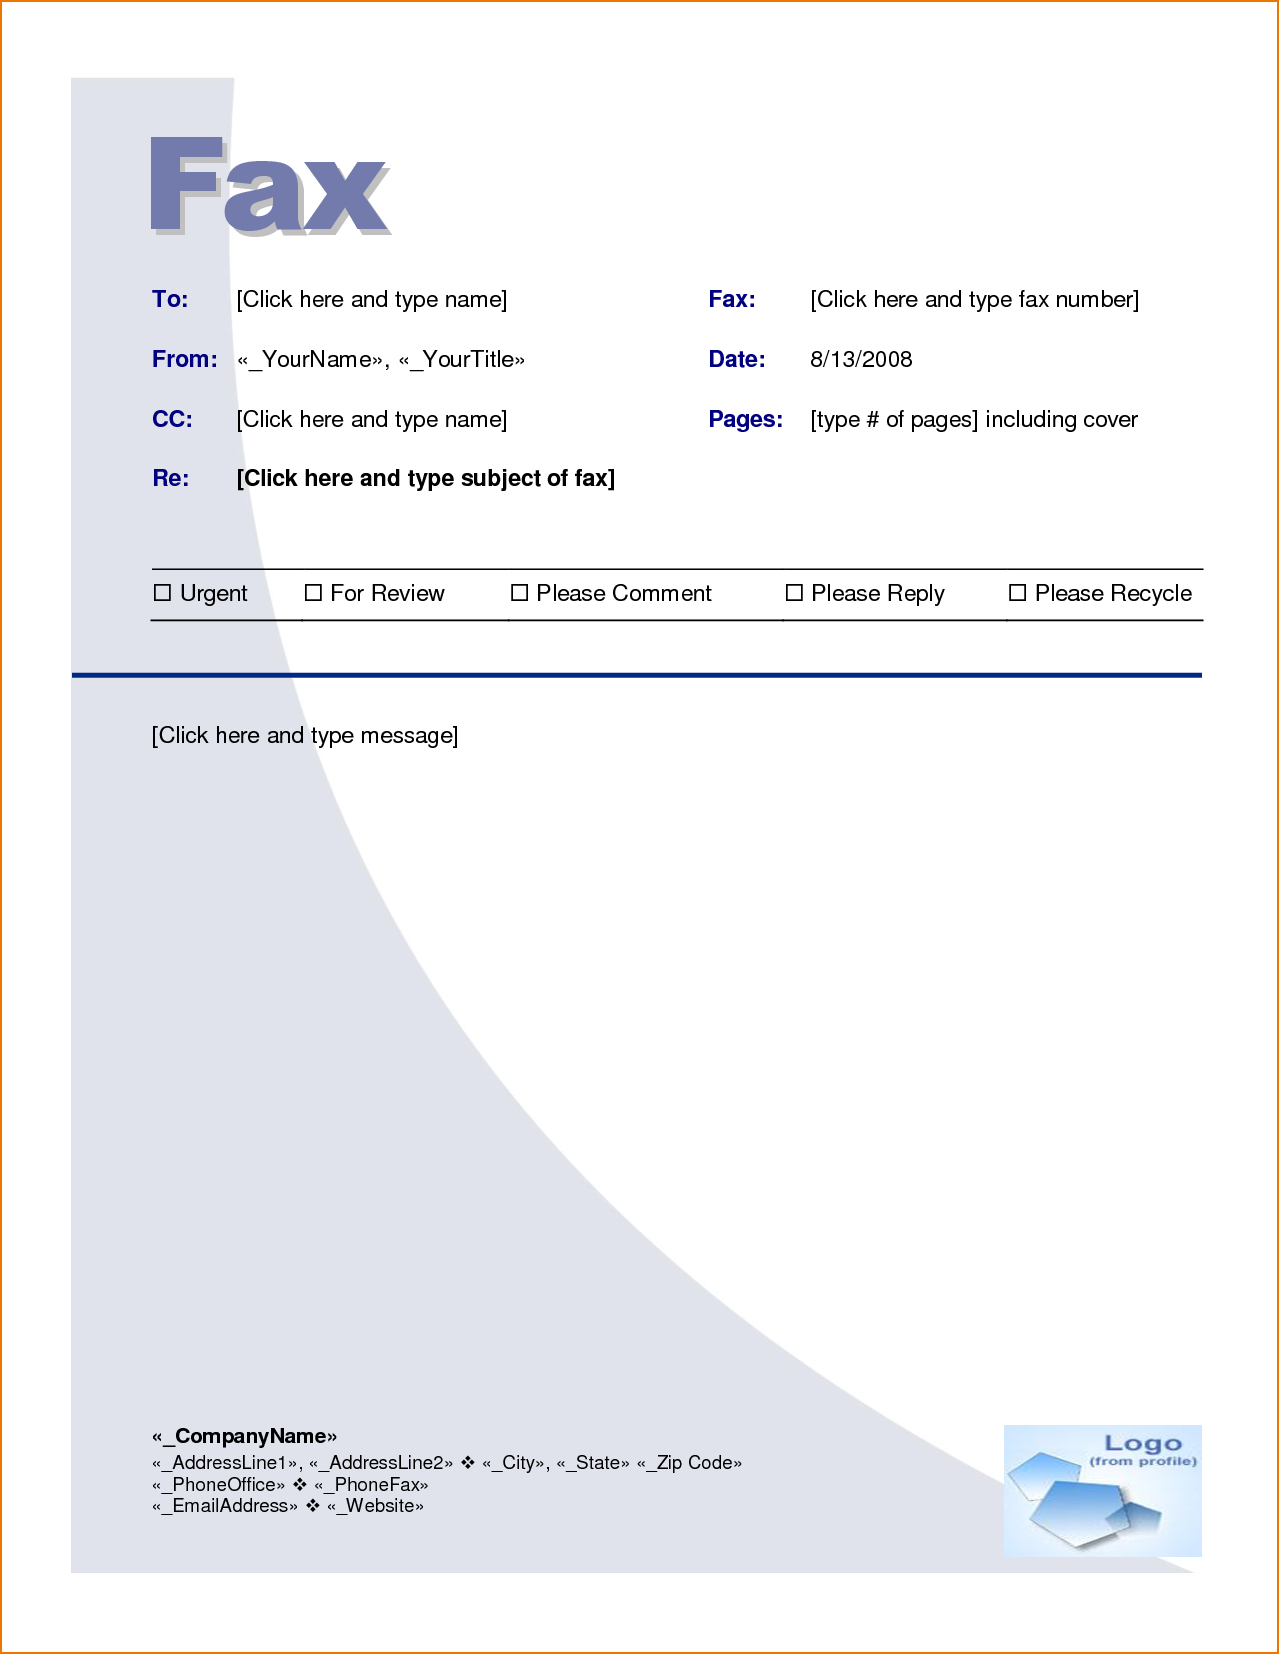 026 Free Fax Cover Sheet Template Word Unique Index Of Cdn In Fax Cover Sheet Template Word 2010